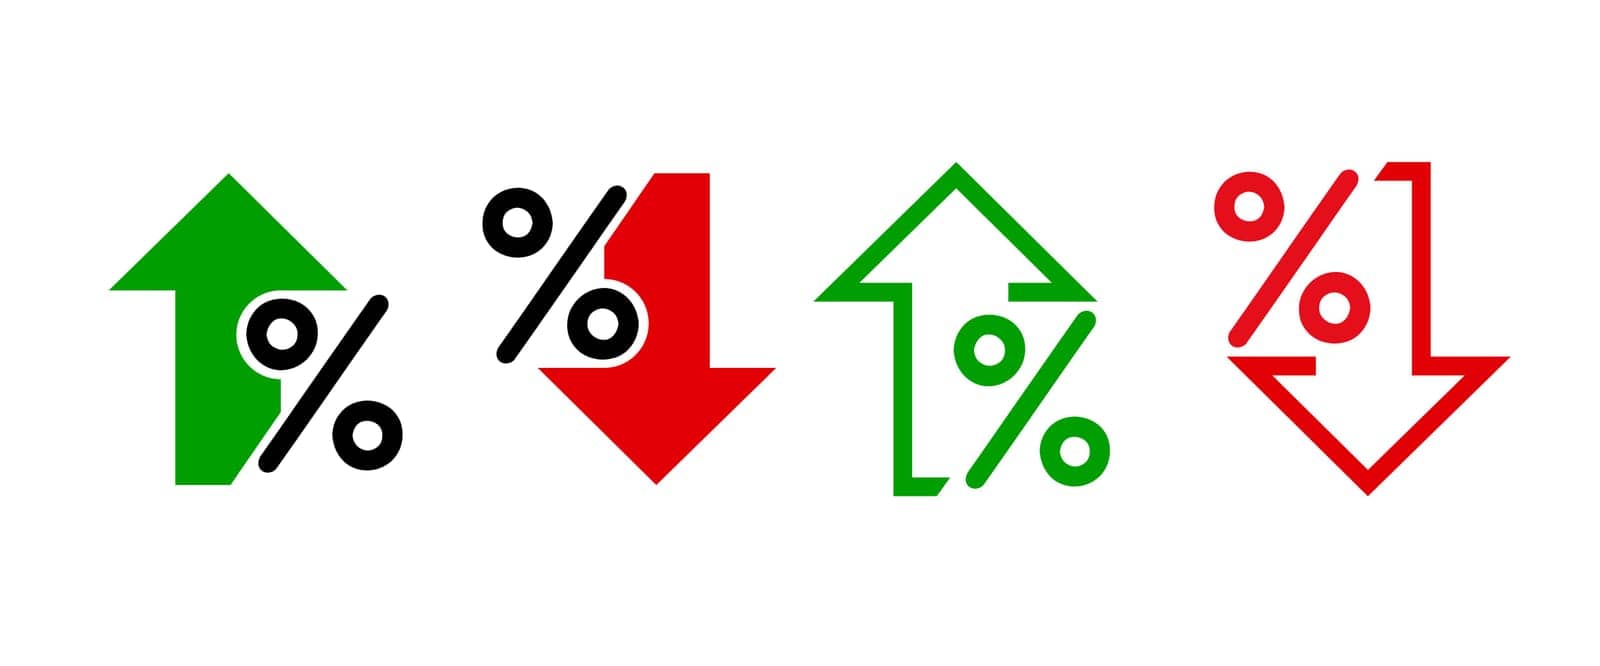 Percentage growth and decline icons. Percent arrow up and down flat style symbols - vector by Burtin